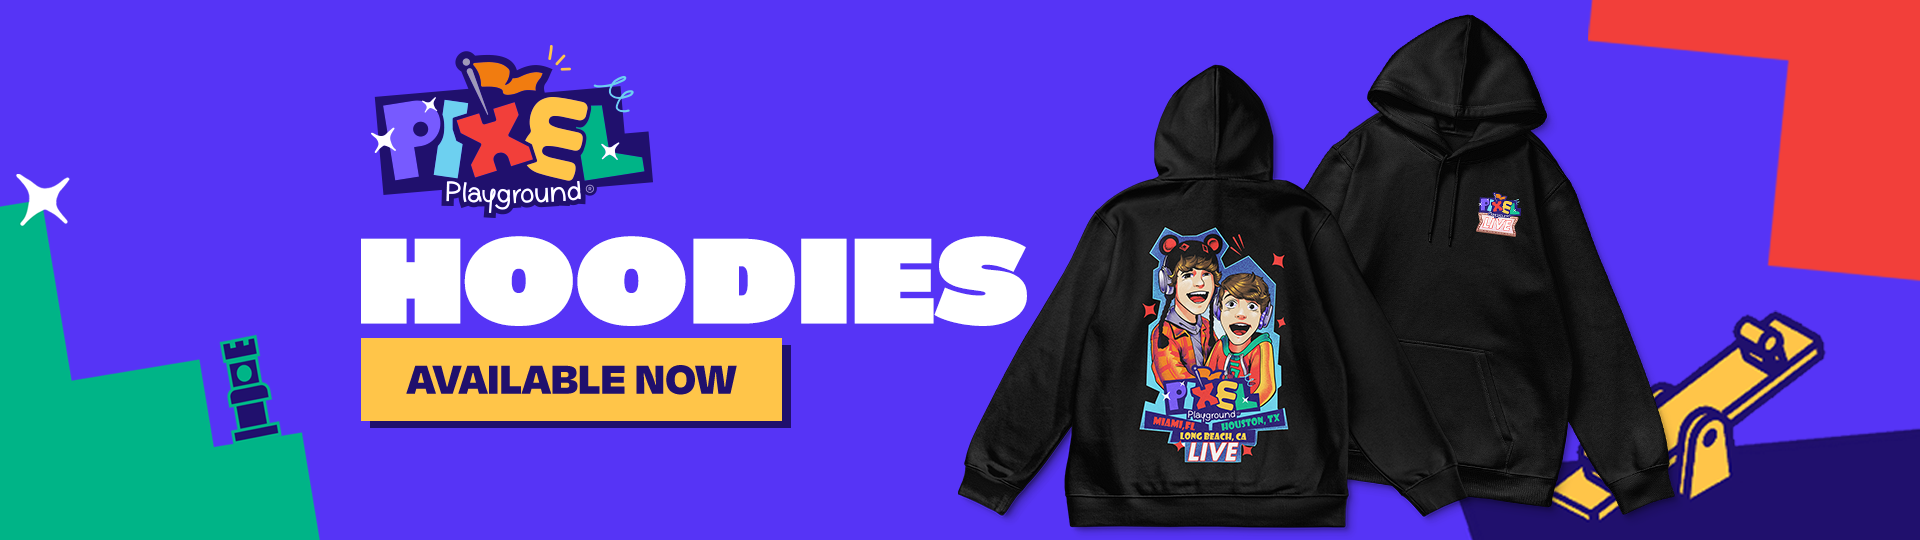 banners hoodie updated 2